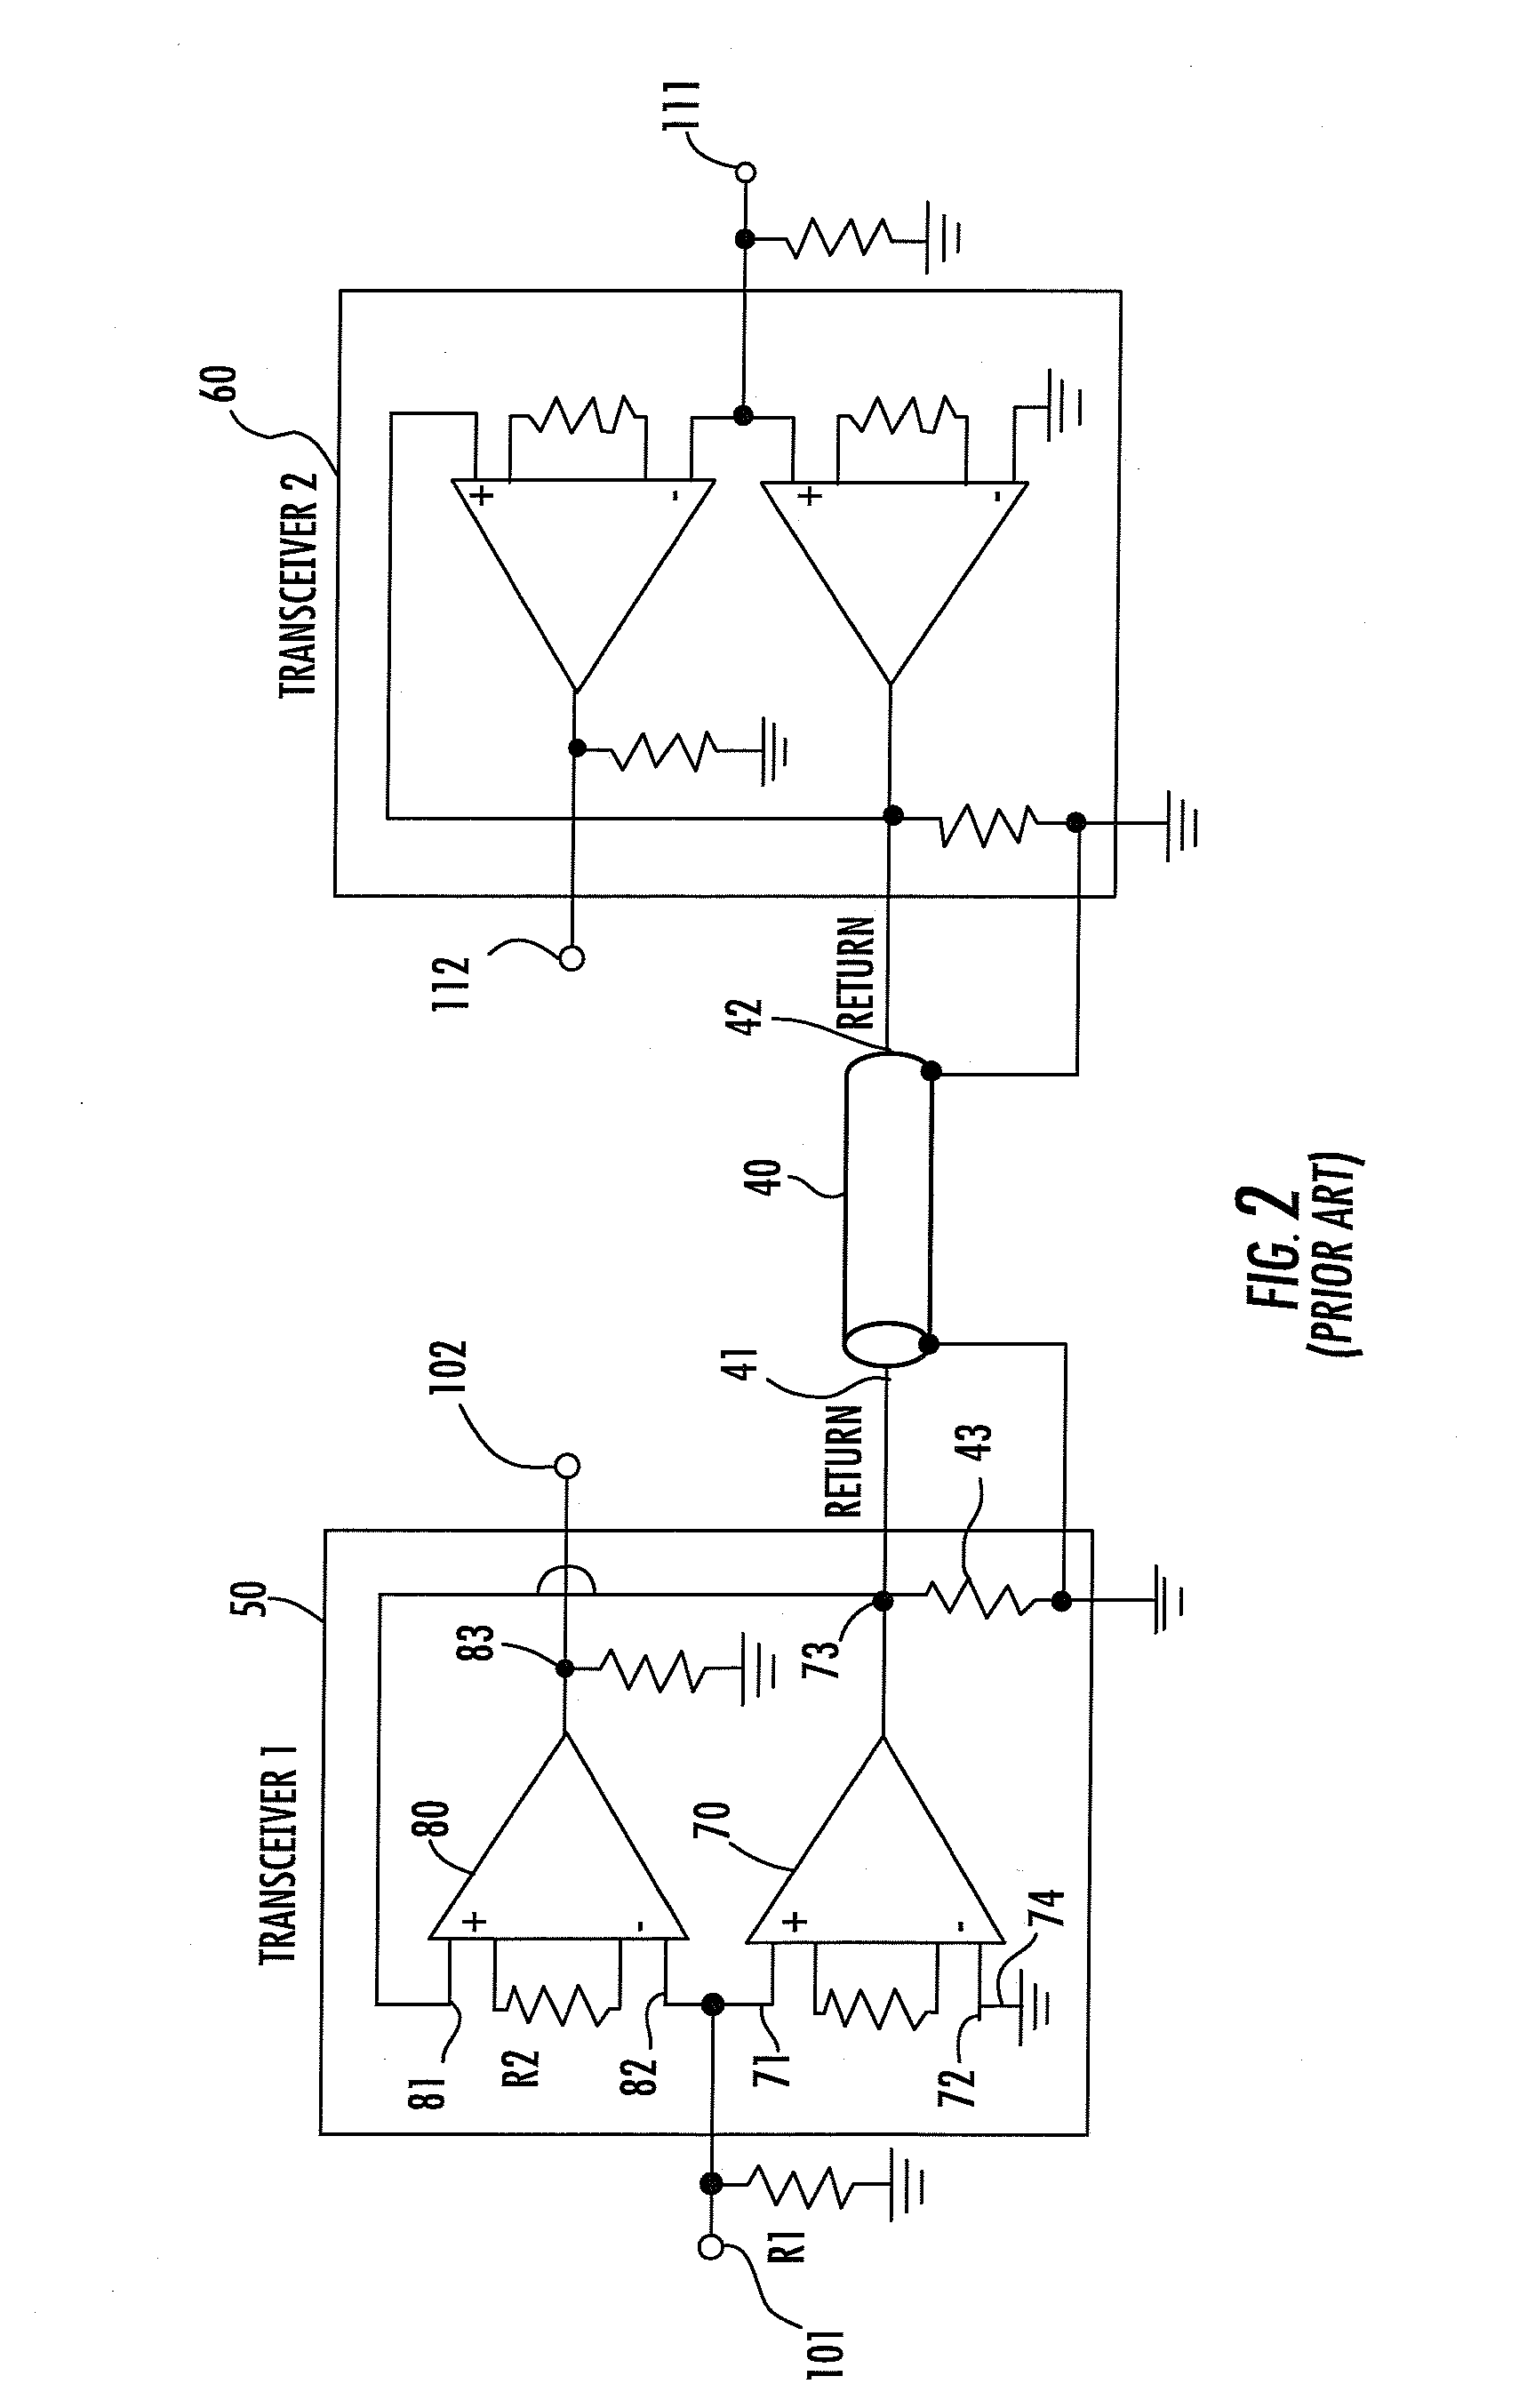 Bidirectional buffered interface for crosspoint switch